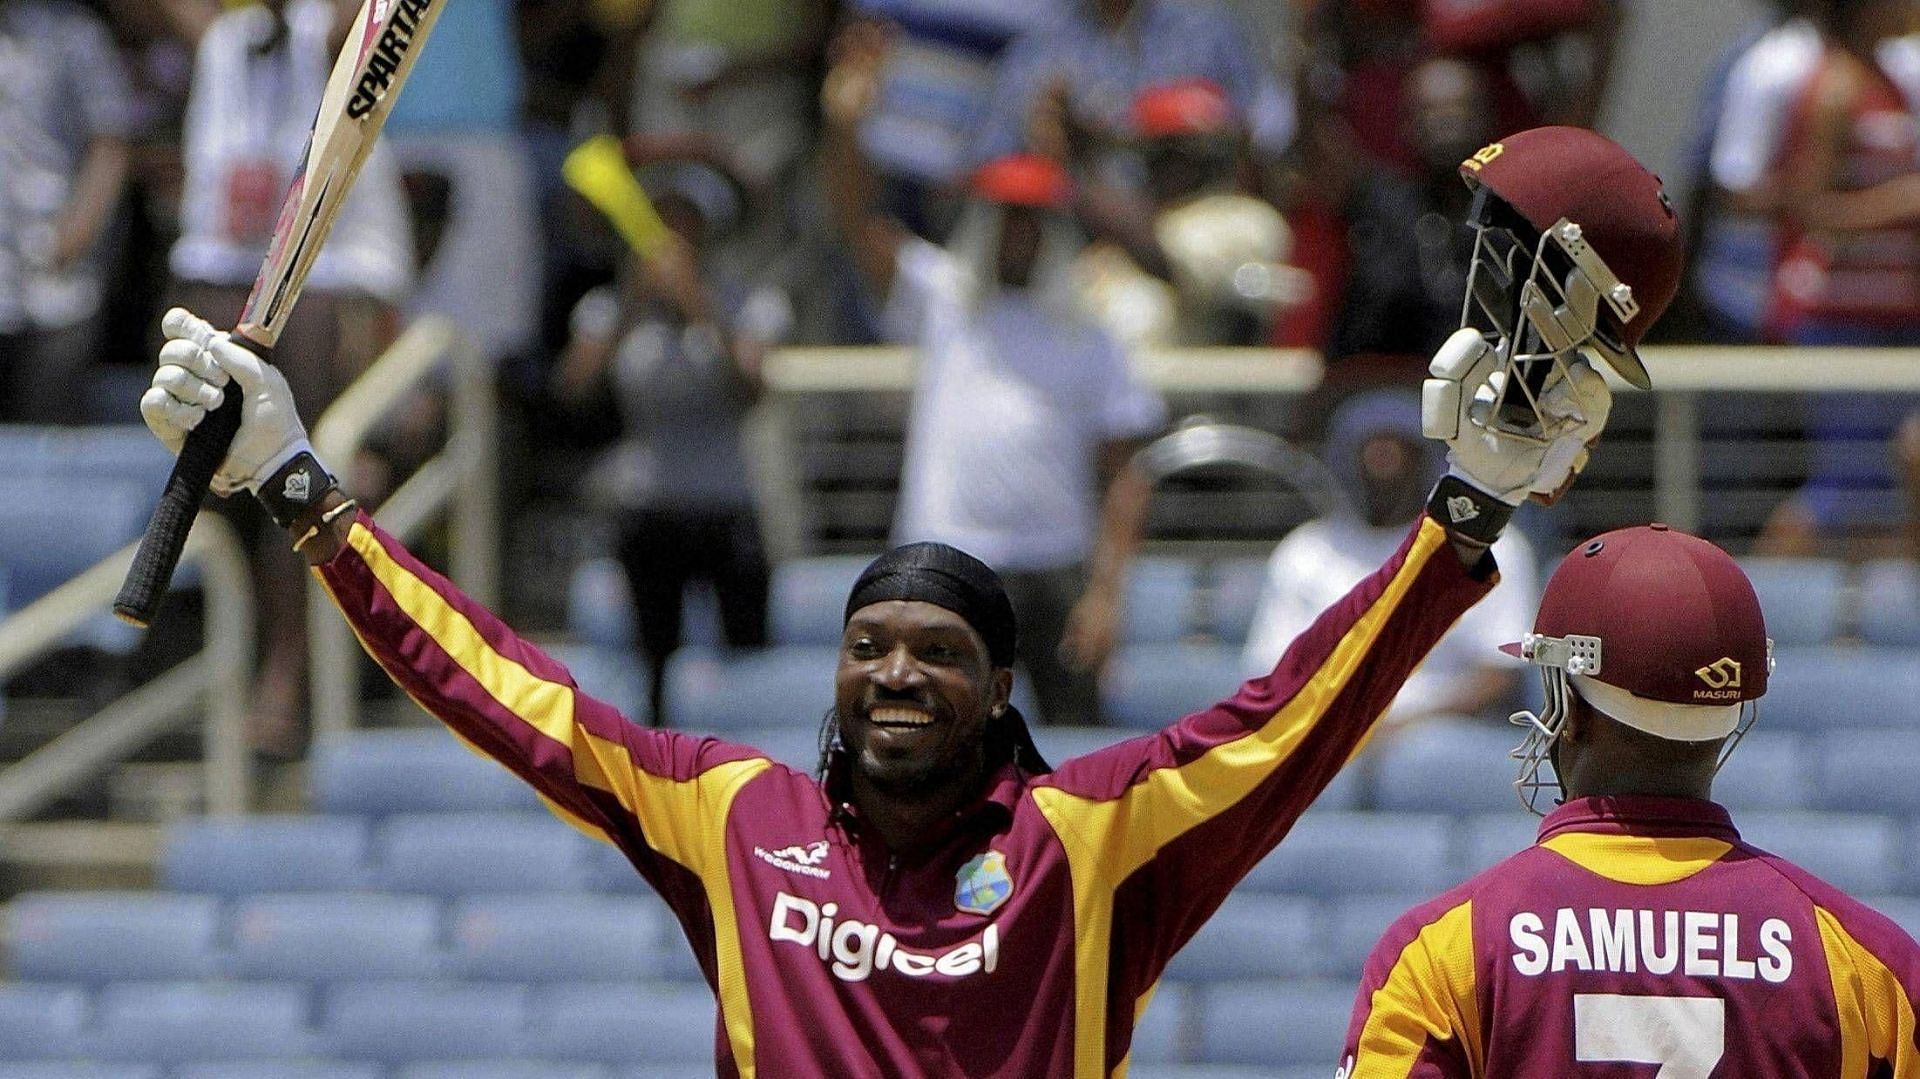 Chris Gayle smashed a record-breaking 175 for RCB in 2013